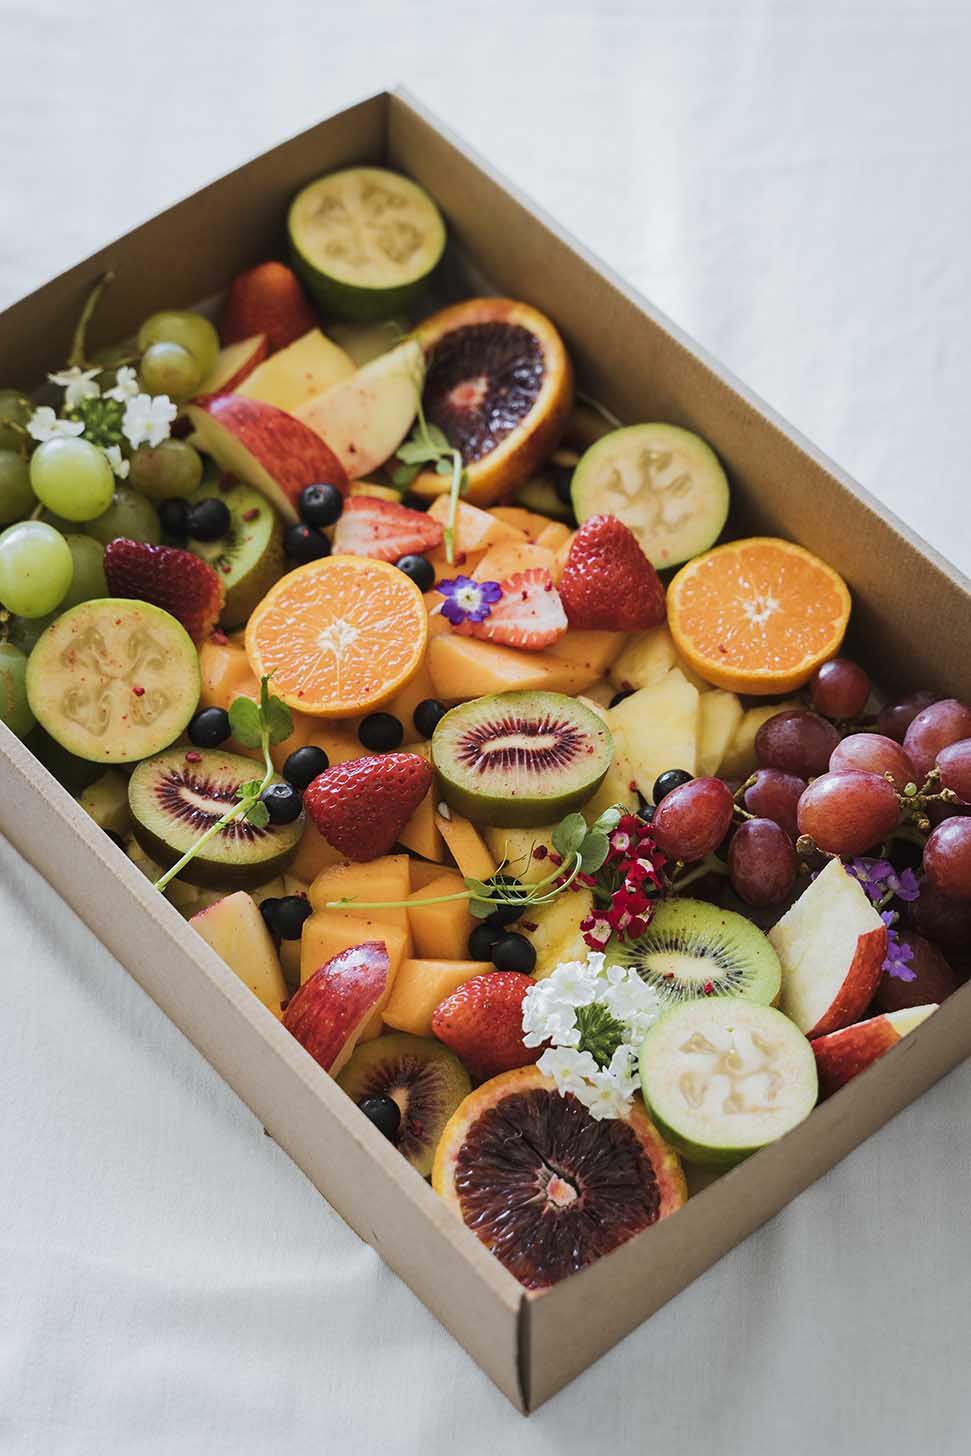 Catered fruit salad platter in box